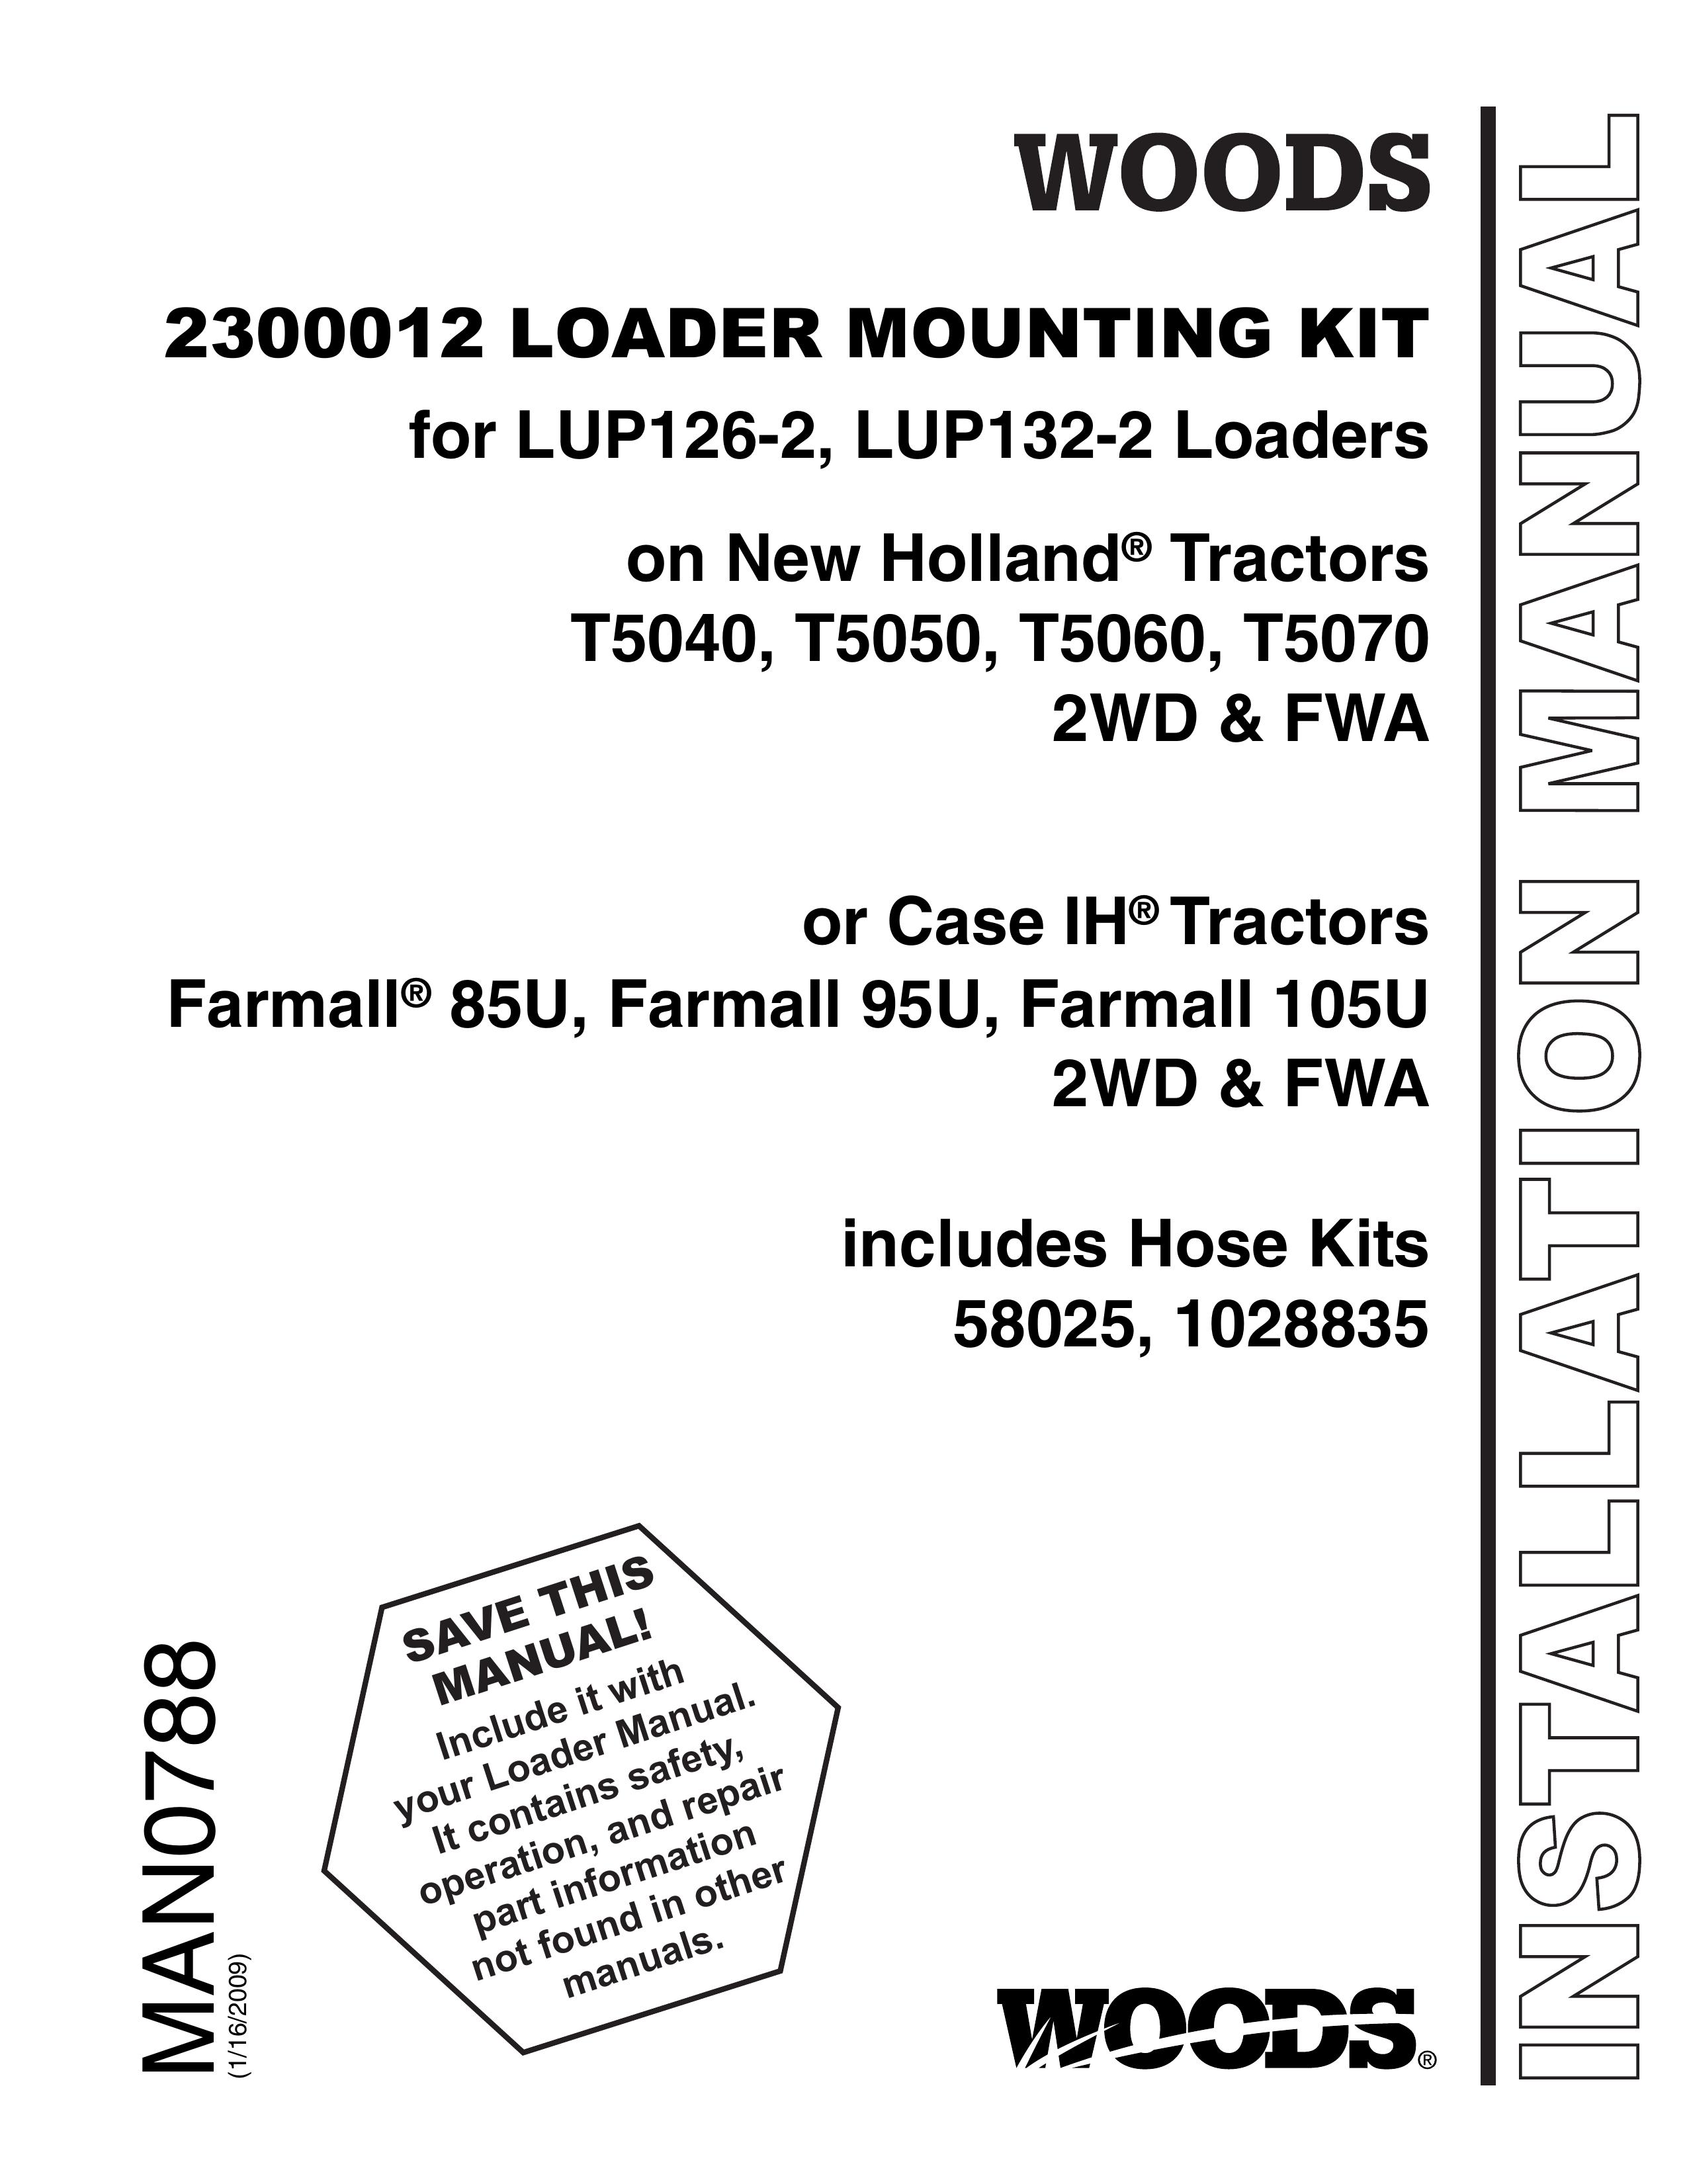 Woods Equipment T5070 Compact Loader User Manual